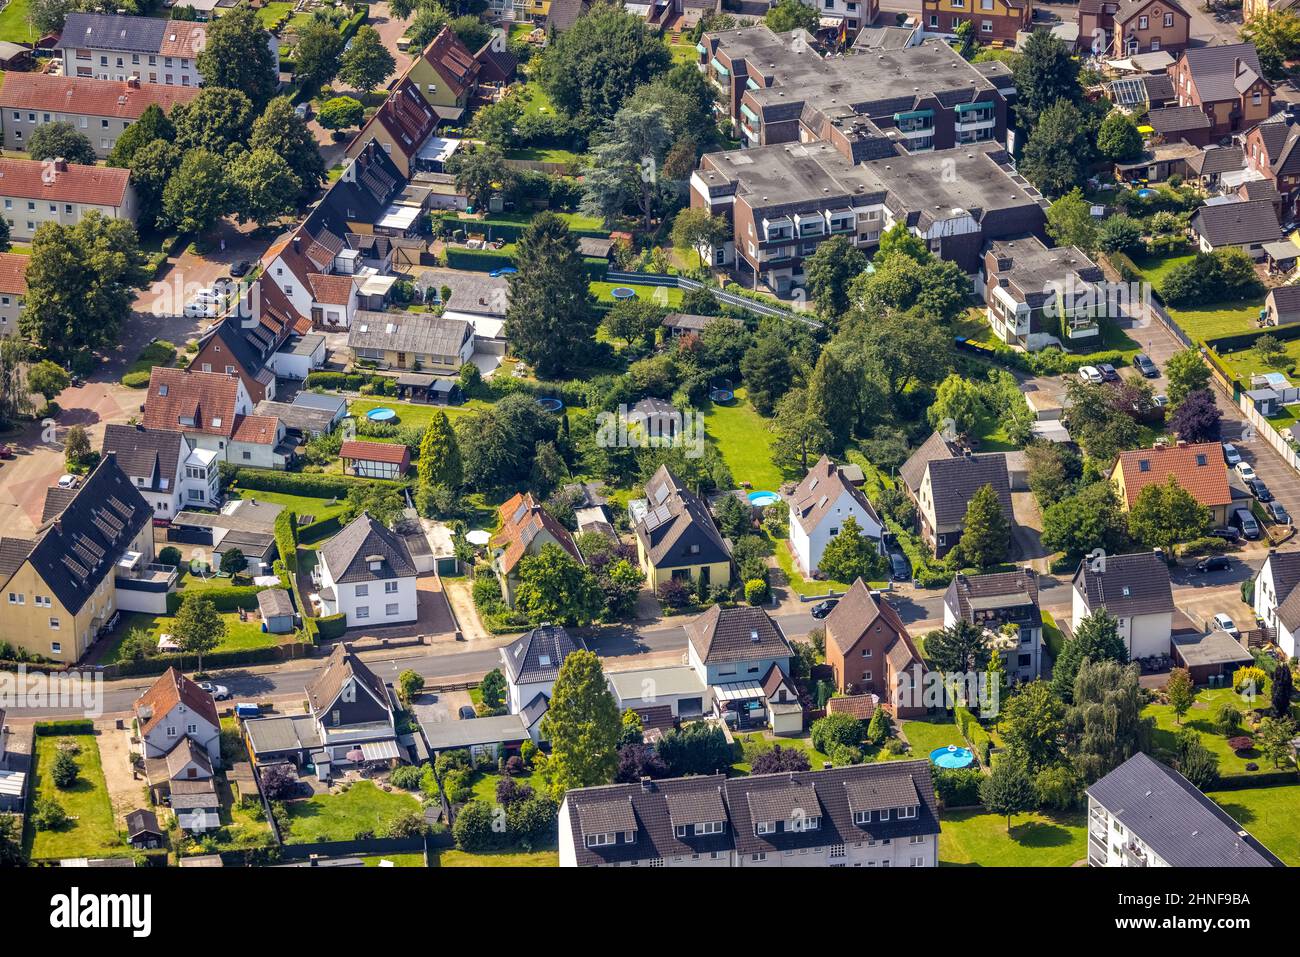 Aerial view, Seniorenzentrum Bönen in a housing estate in Borgholz, Bönen, Ruhr area, North Rhine-Westphalia, Germany, old people's home, old people's Stock Photo